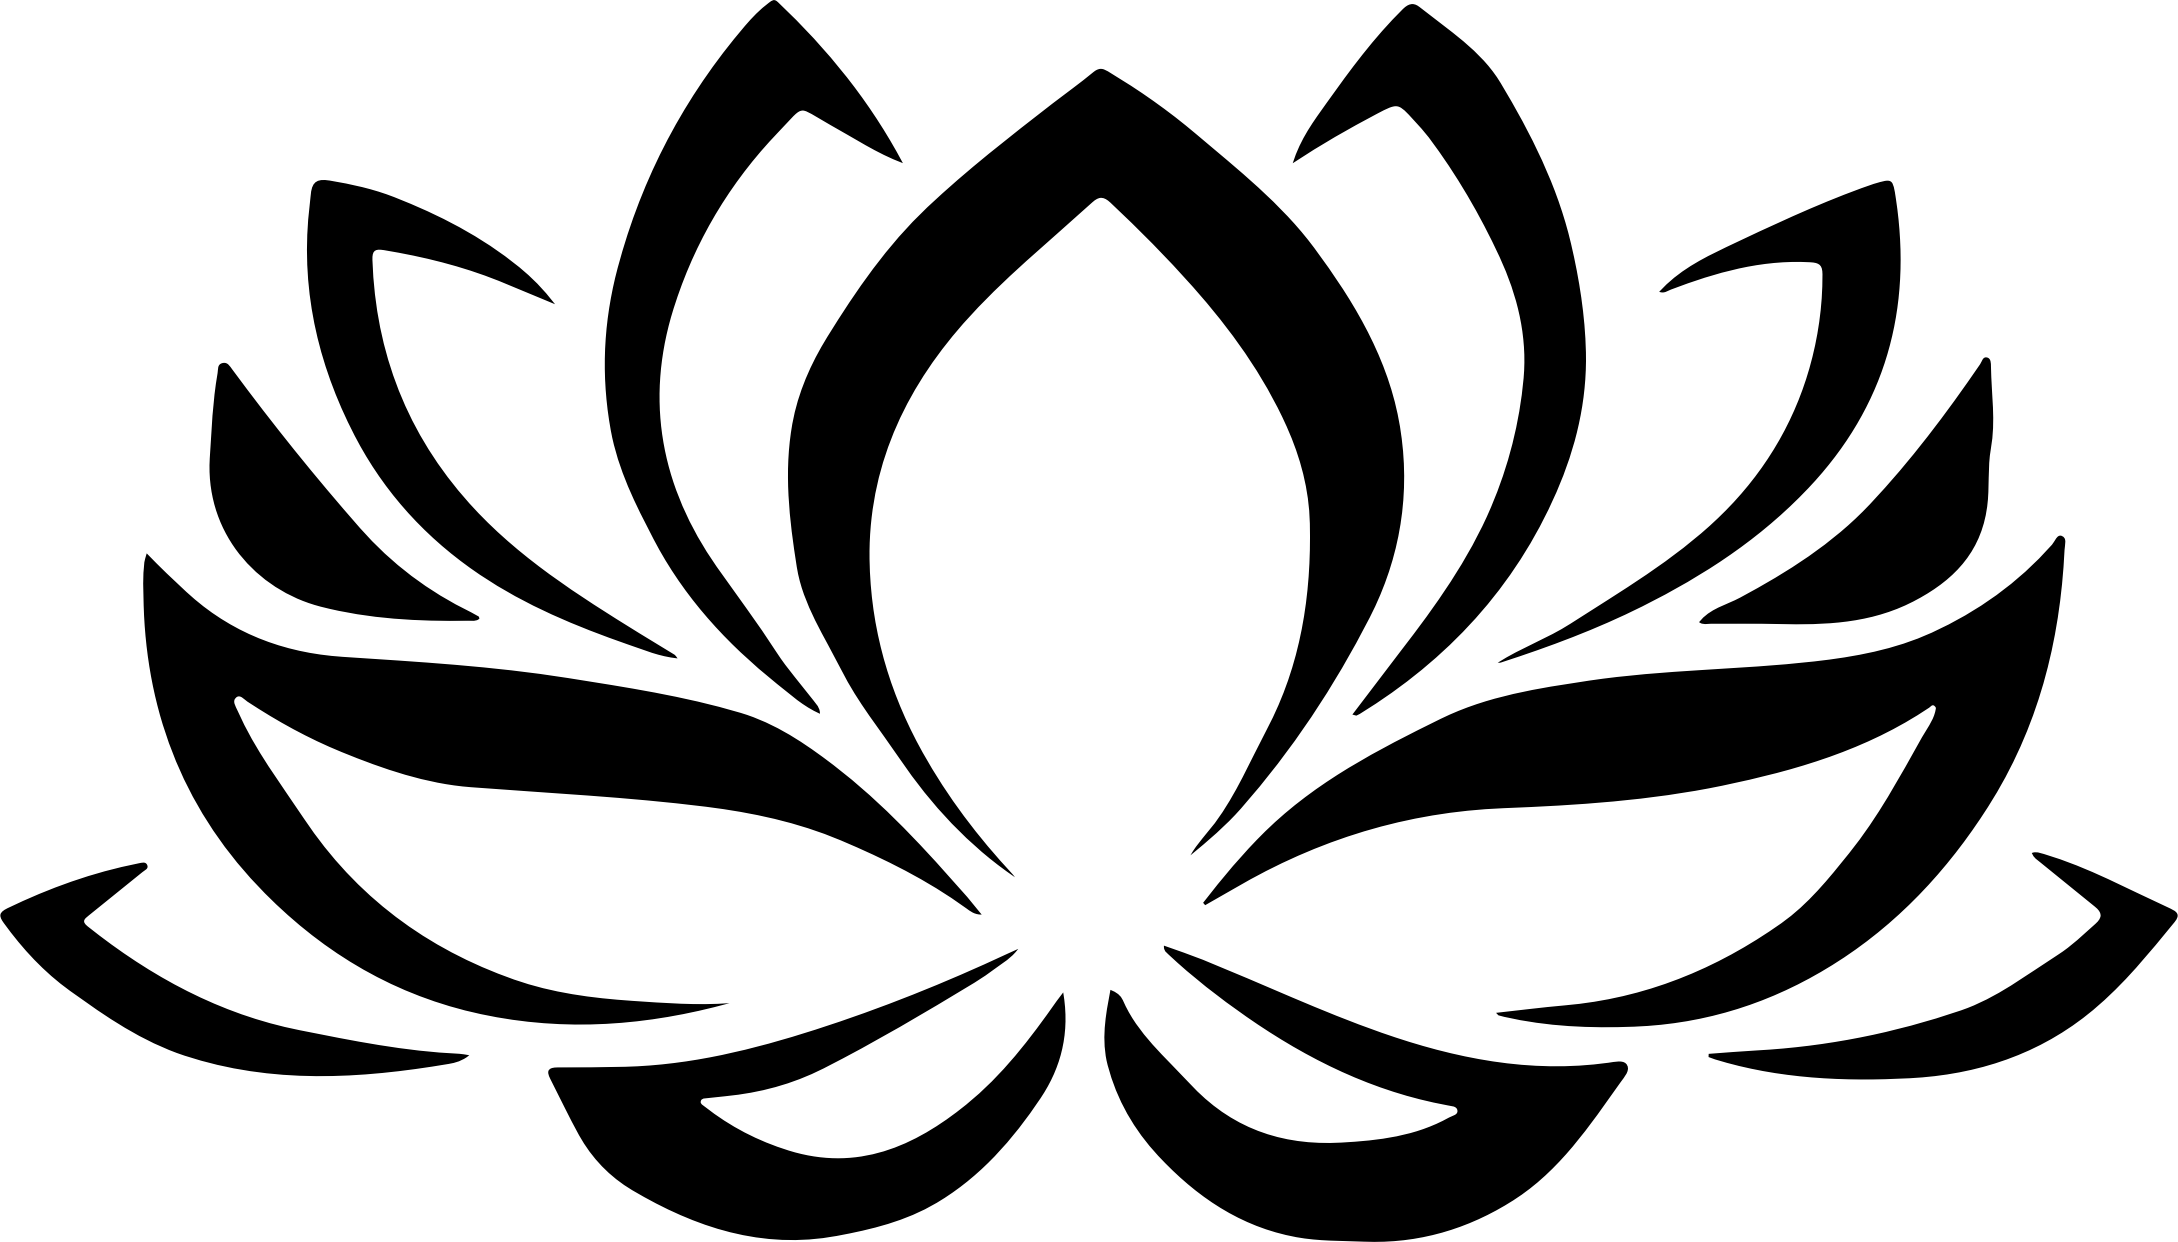 Black Lotus Flower Logo - Lotus flower images graphic - RR collections